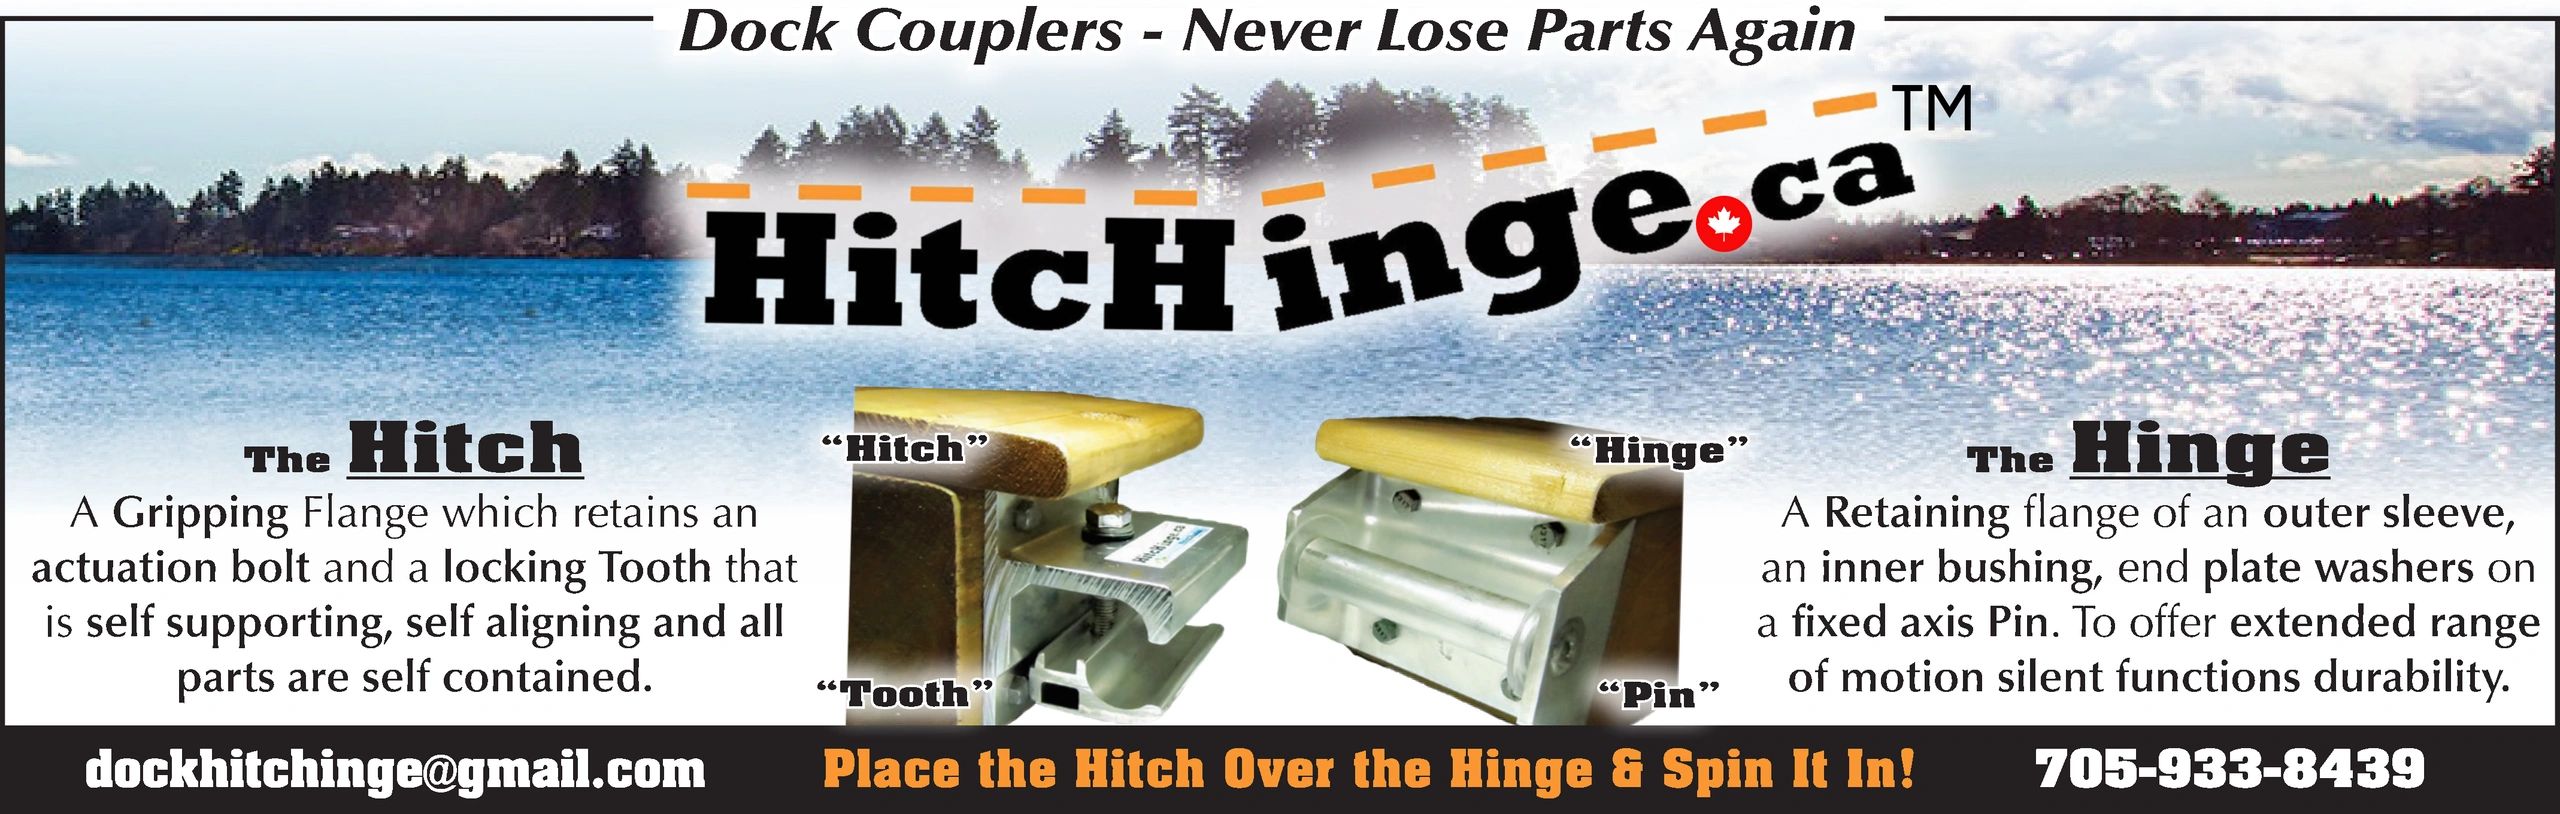 HitcHinge banner explaining Hitch and Hinge. A lake setting with HitcHinge photo. Contact info on it